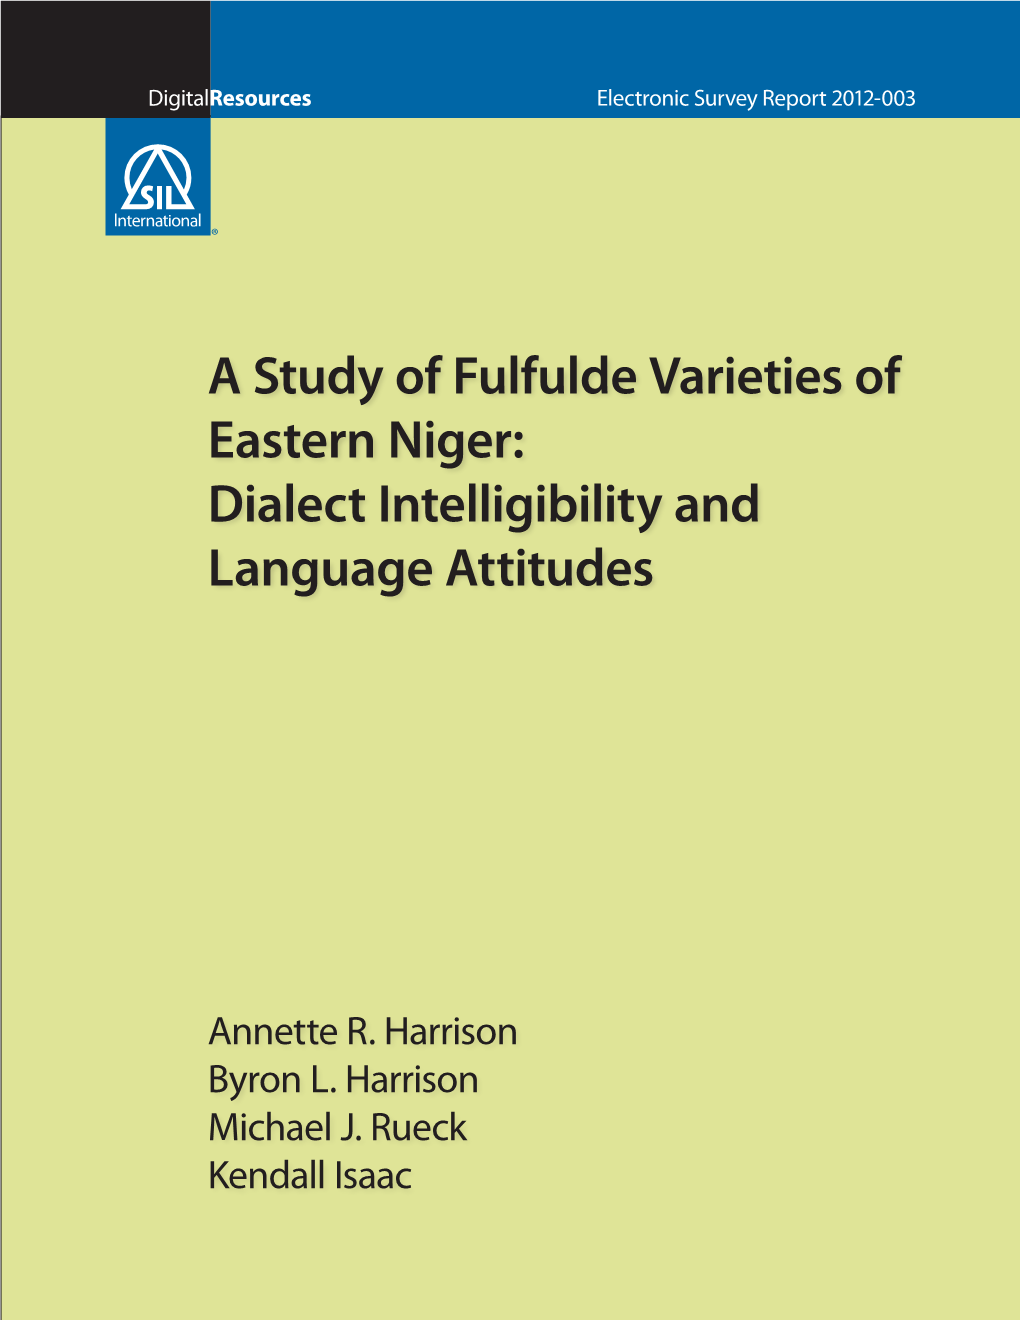 A Study of Fulfulde Varieties of Eastern Niger: Dialect Intelligibility and Language Attitudes